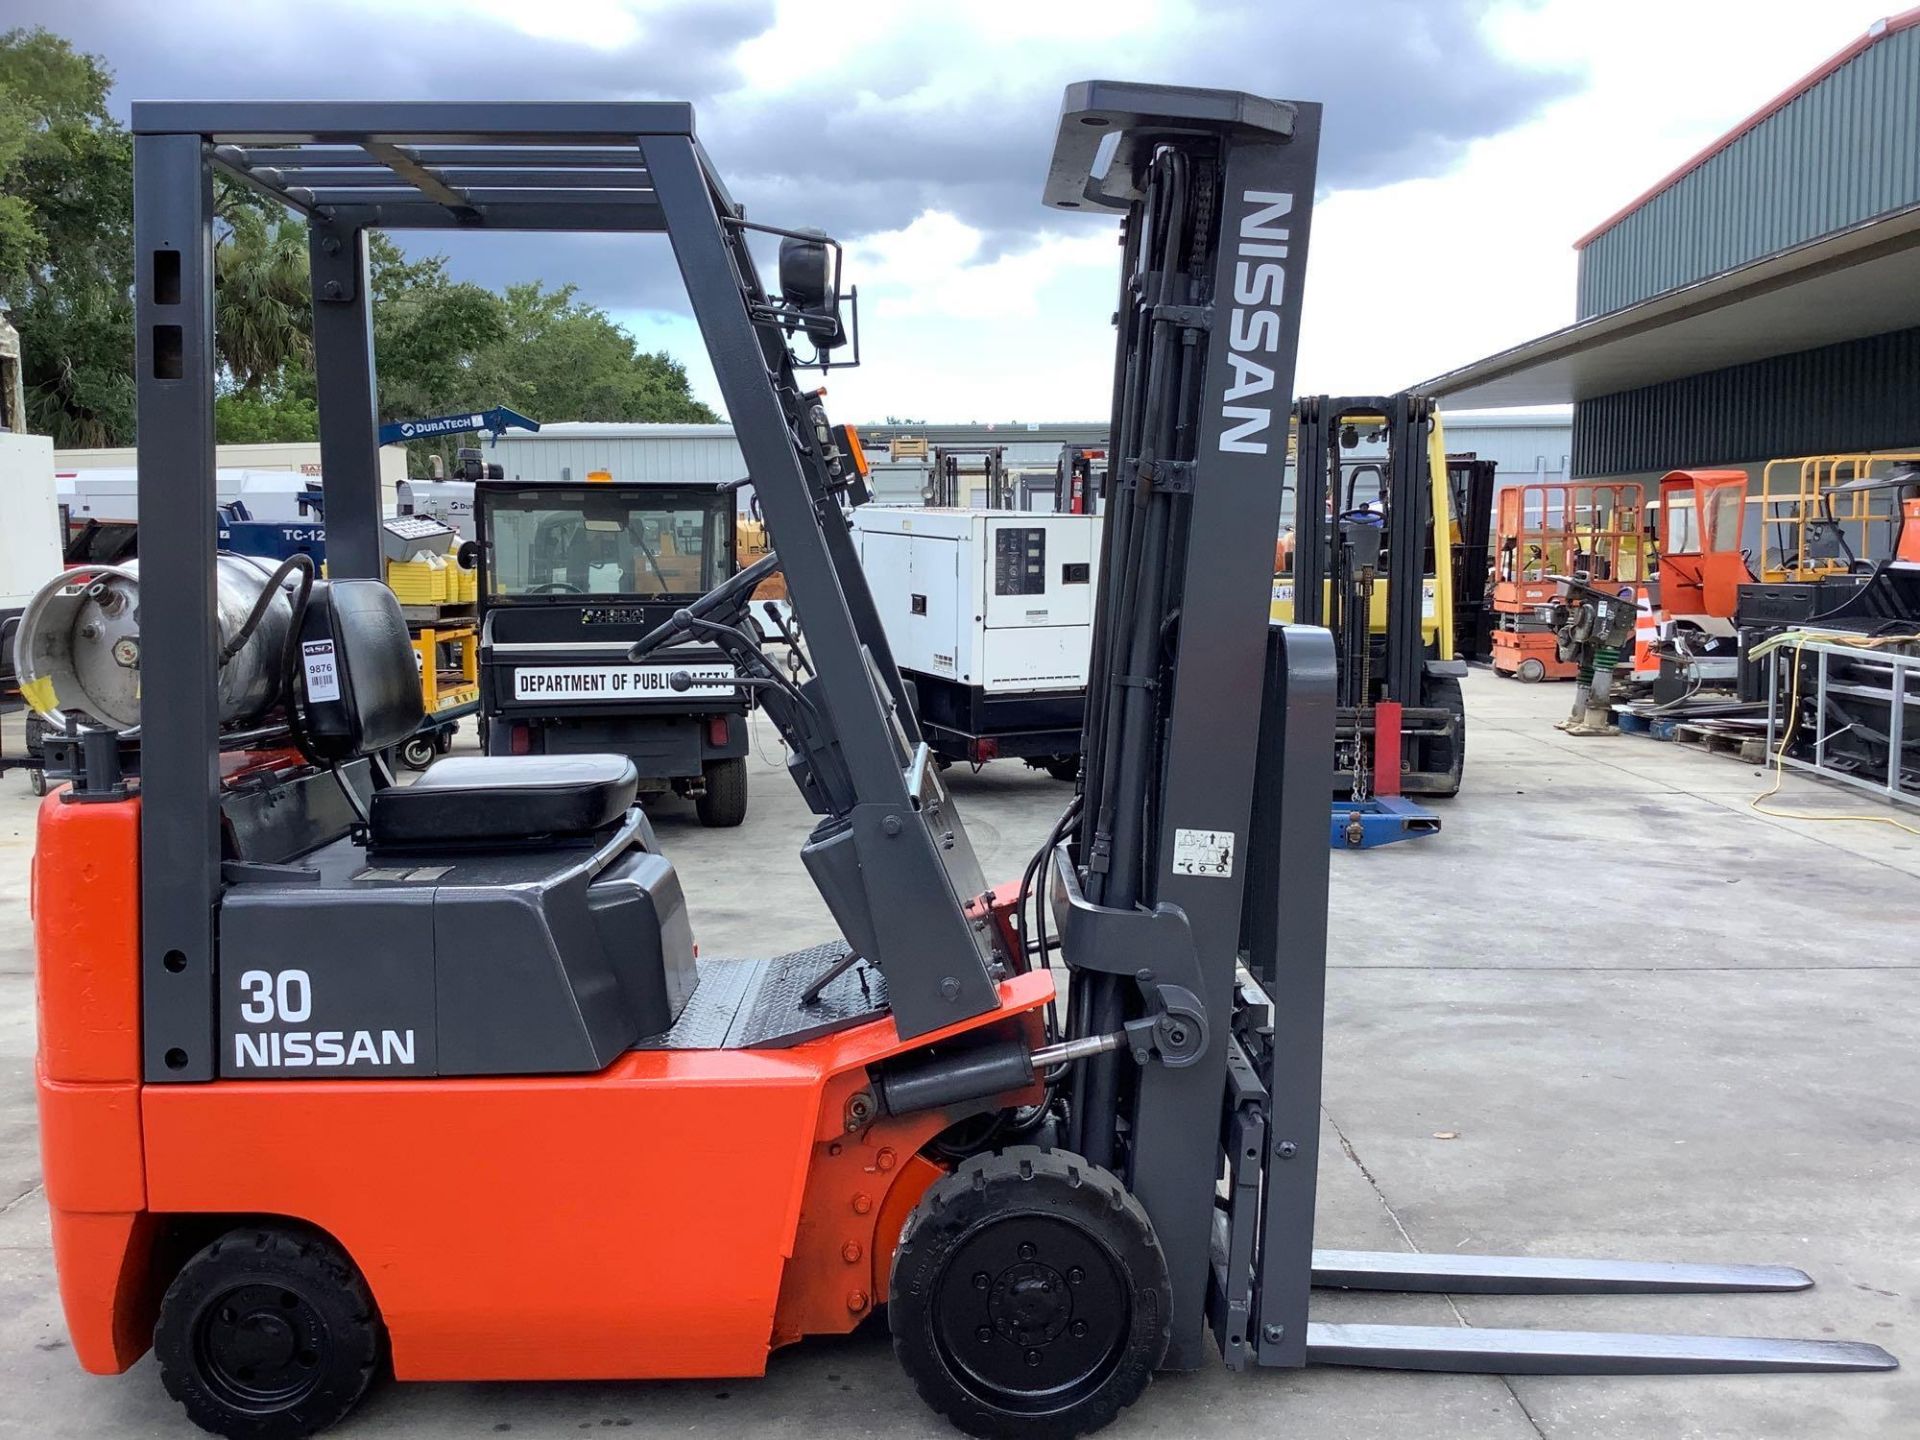 NISSAN OPTIMUM 30 FORKLIFT MODEL CPJ01A15PV, LP POWERED, APPROX MAX CAPACITY 3000LBS, APPROX MAX HEI - Image 9 of 17